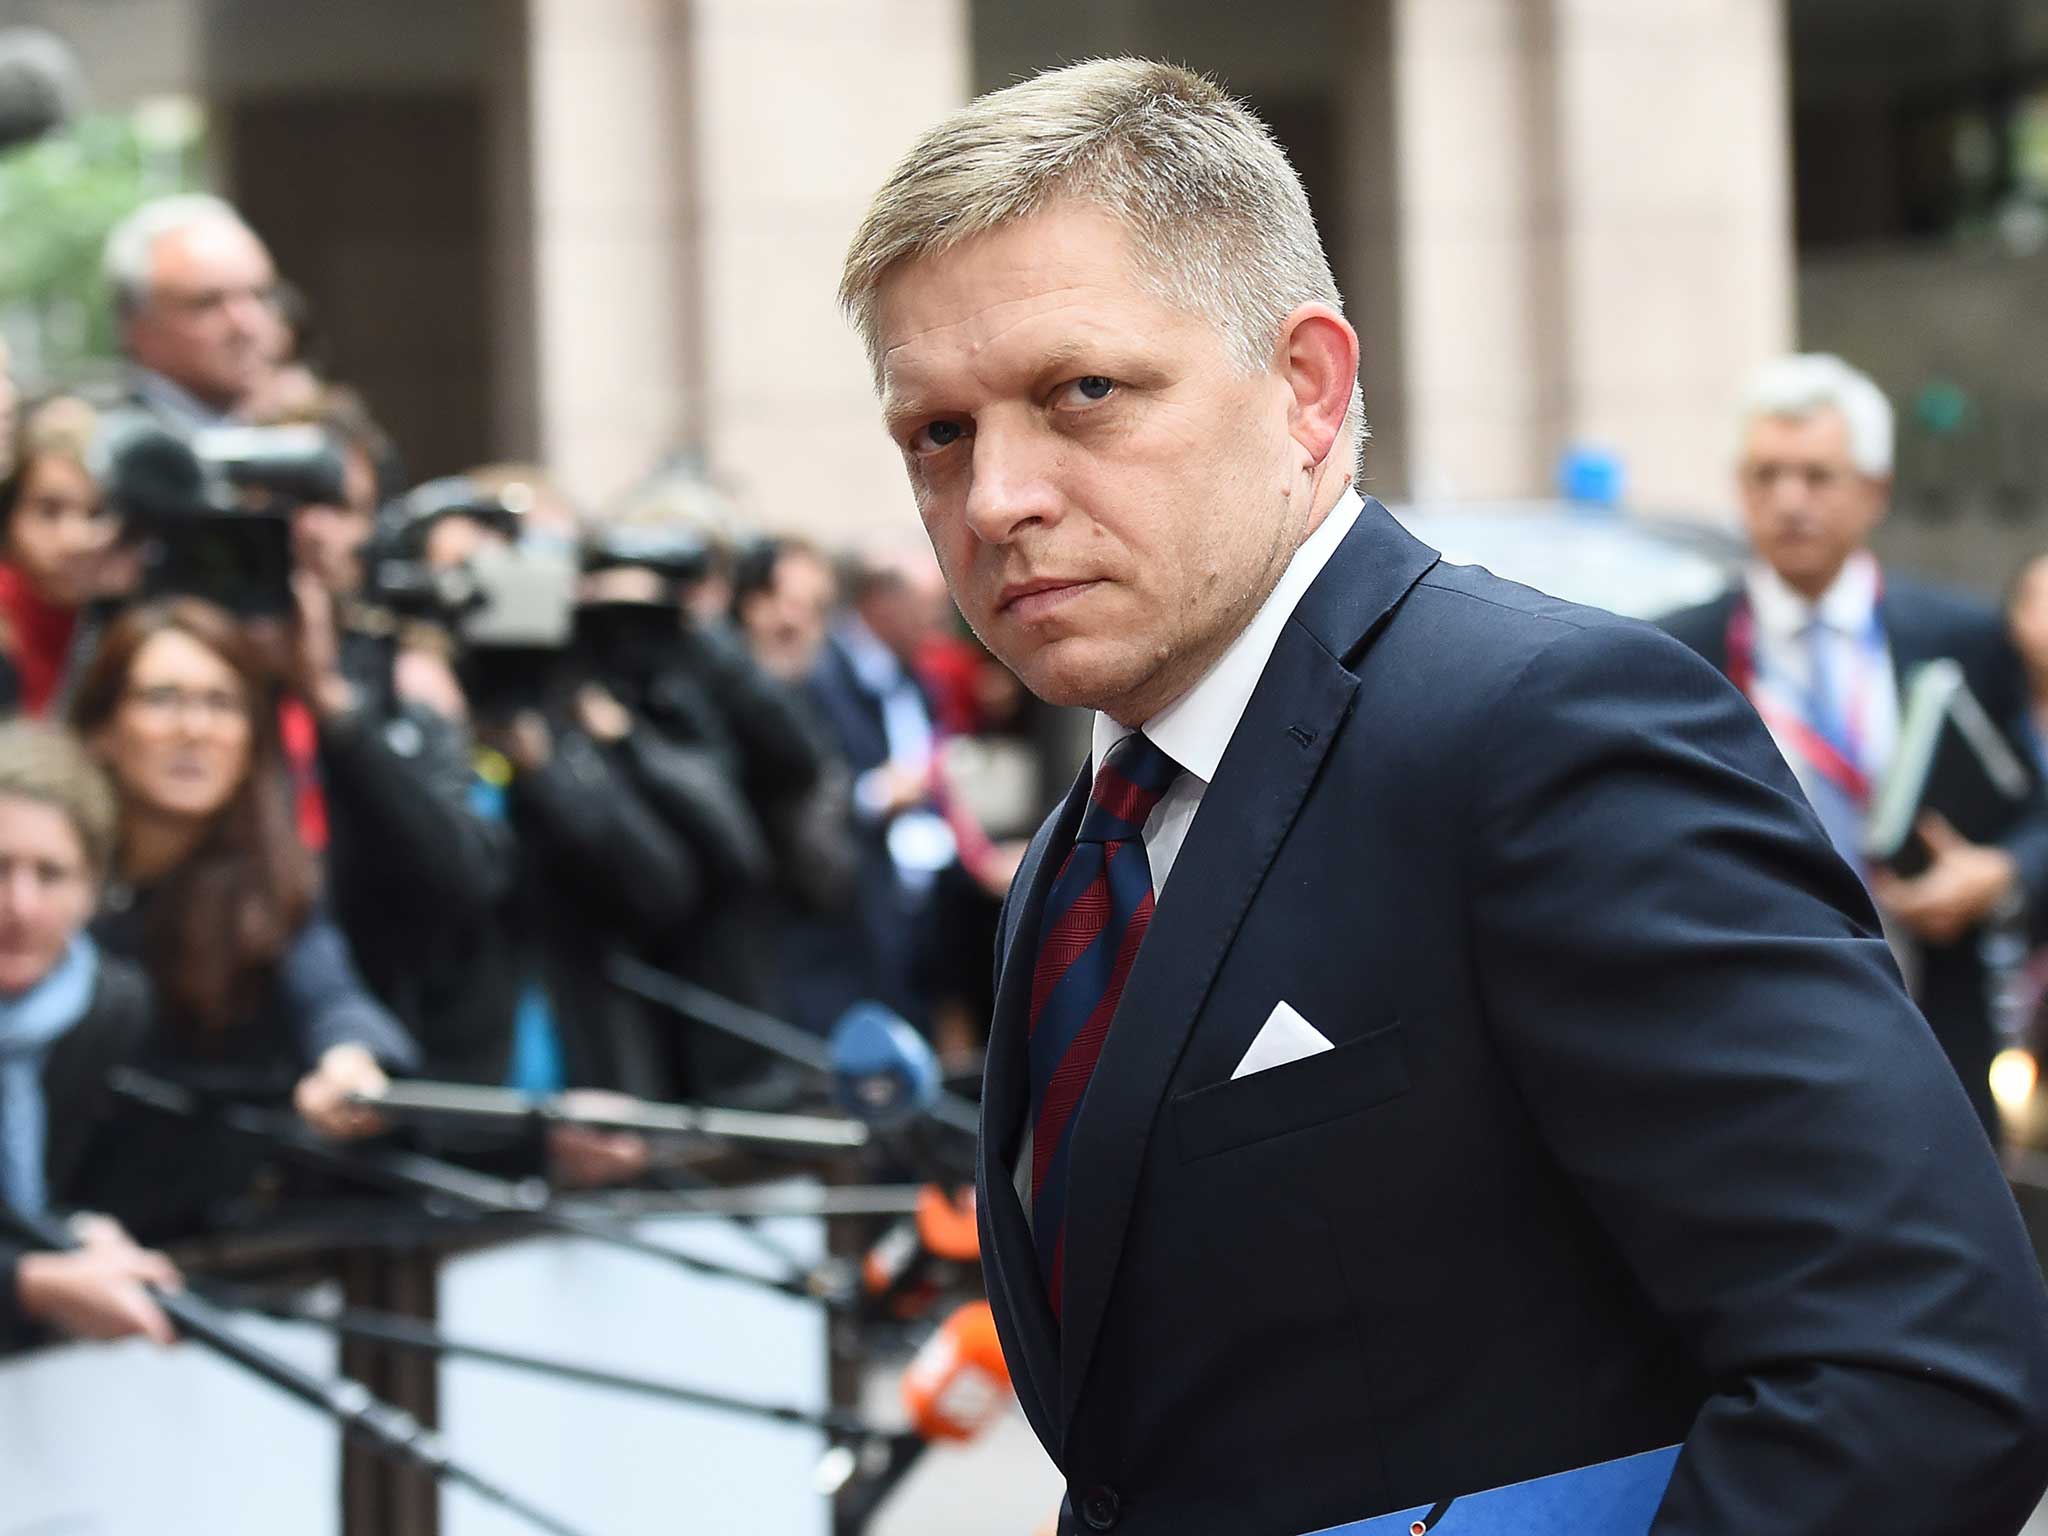 Mr Fico has said there are no mosques in Slovakia so Muslims 'would not fit in'